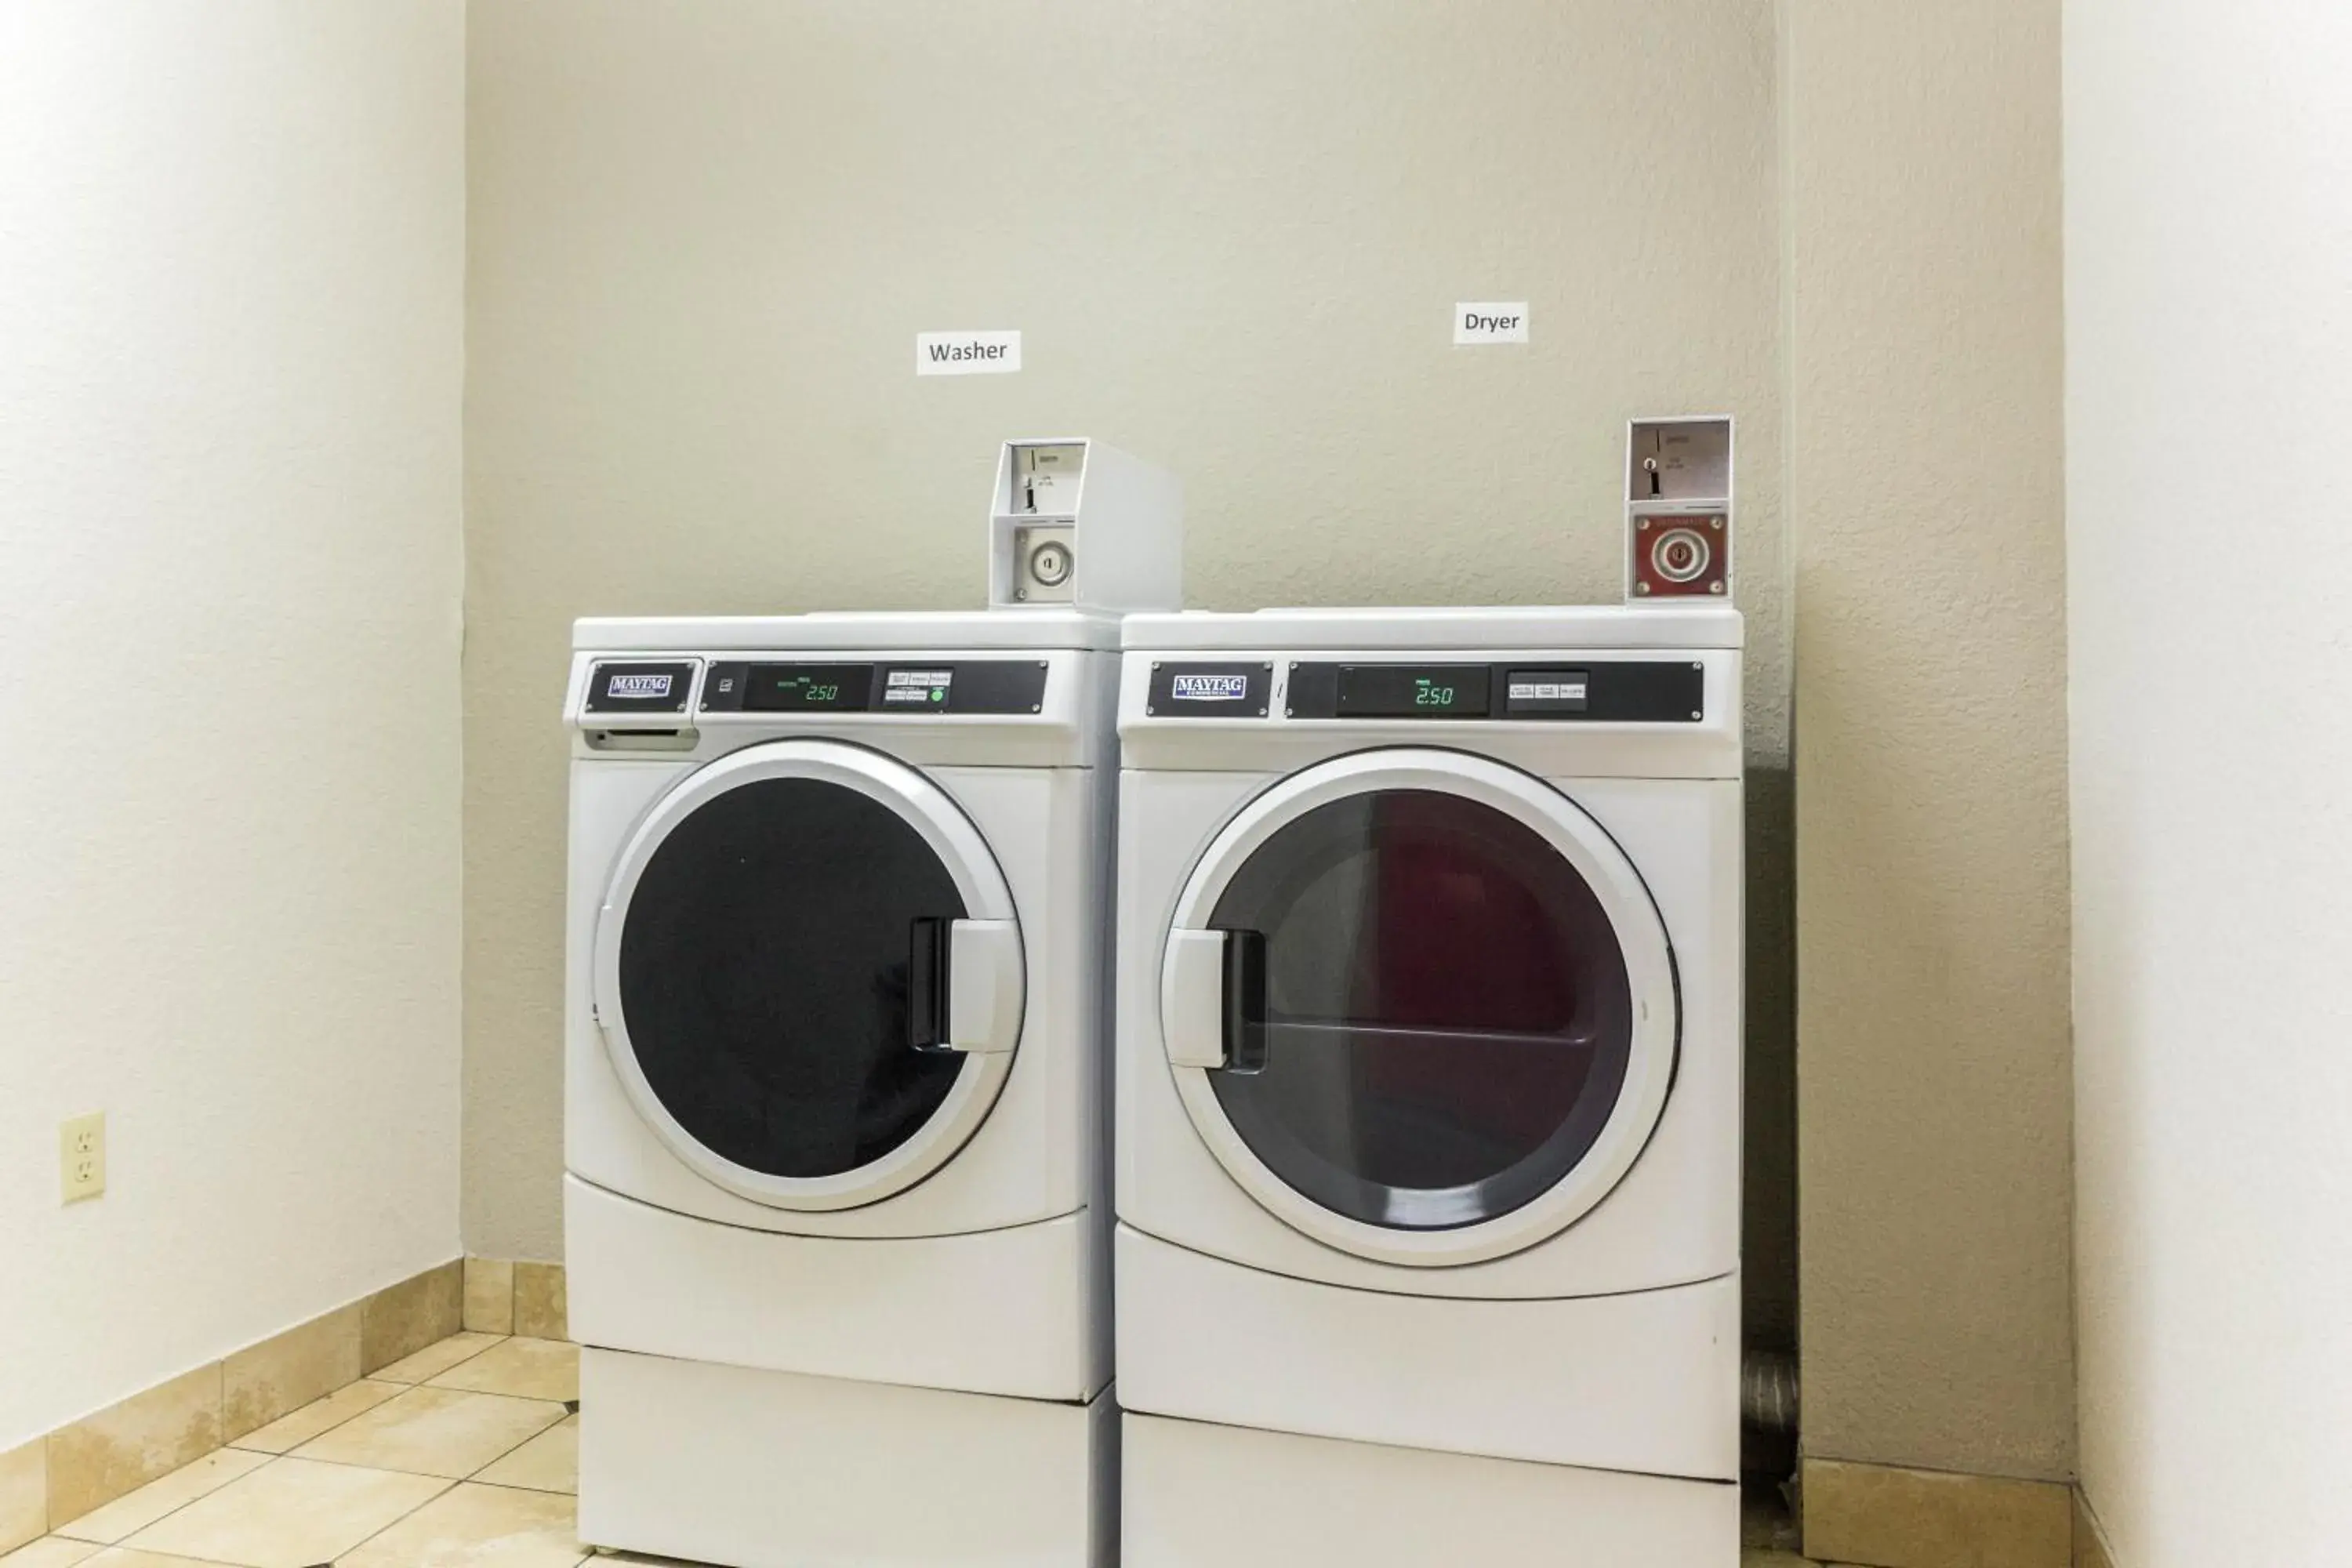 Area and facilities in Scottish Inn and Suites Baytown